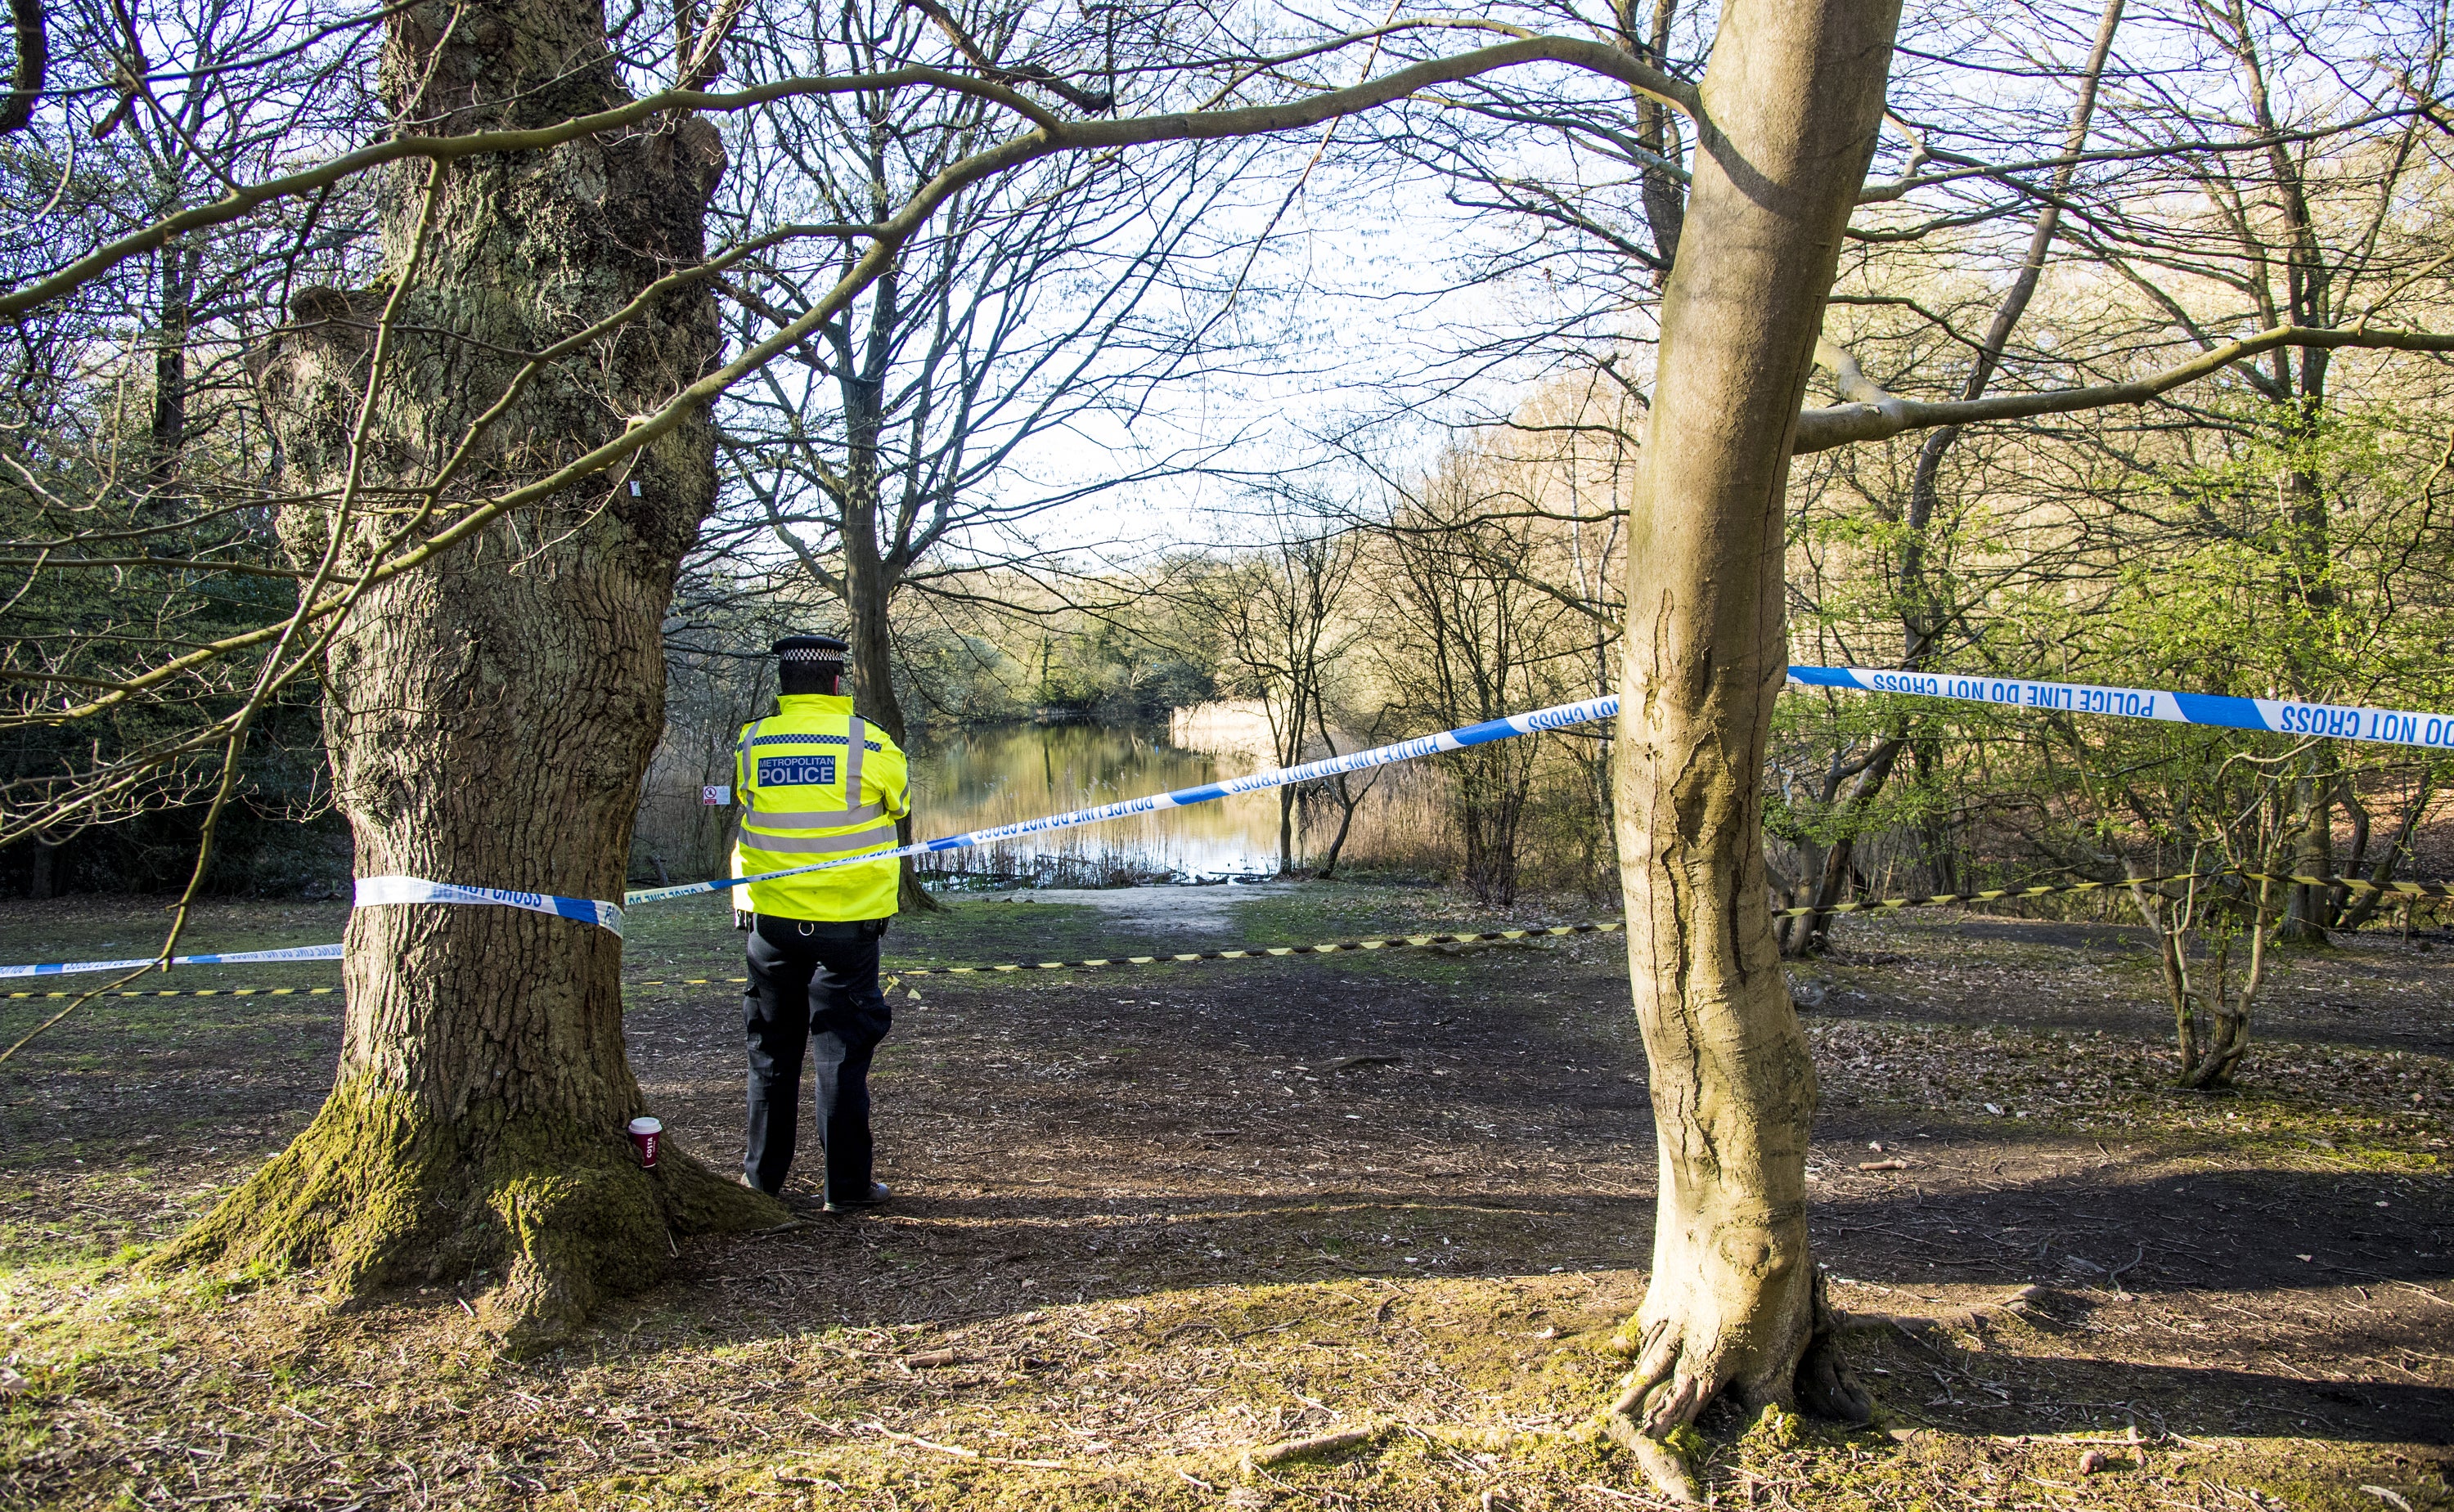 Metropolitan Police officers at the scene at the Wake Valley pond in Epping Forest following the discovery of Richard Okorogheye’s body.